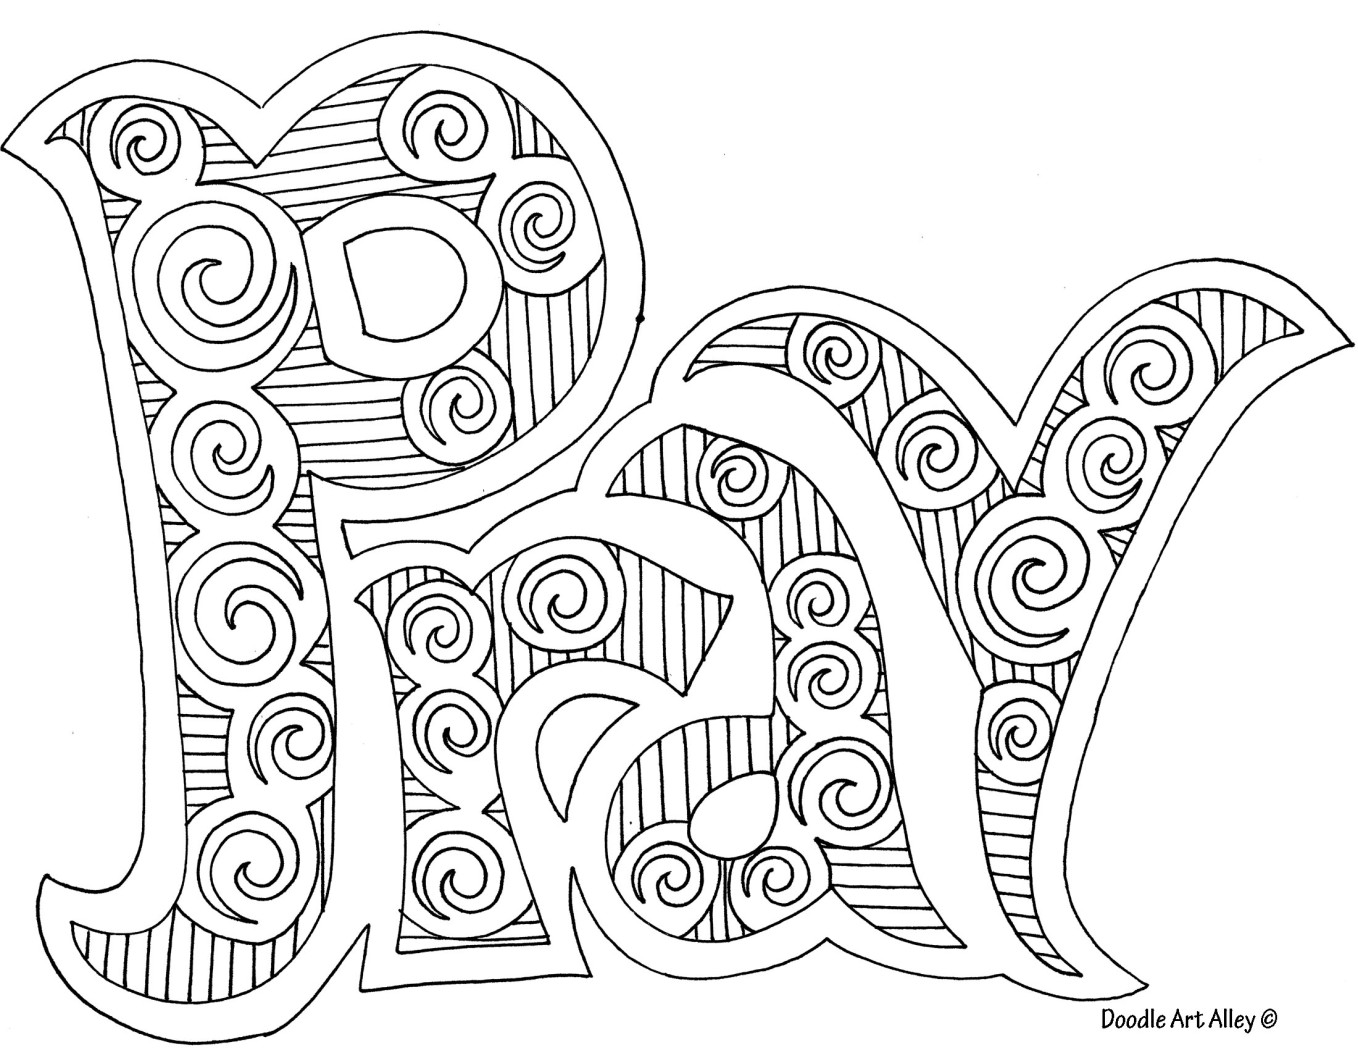 Prayer Coloring Pages For Adults
 pray adult religious coloring page I want to do this for